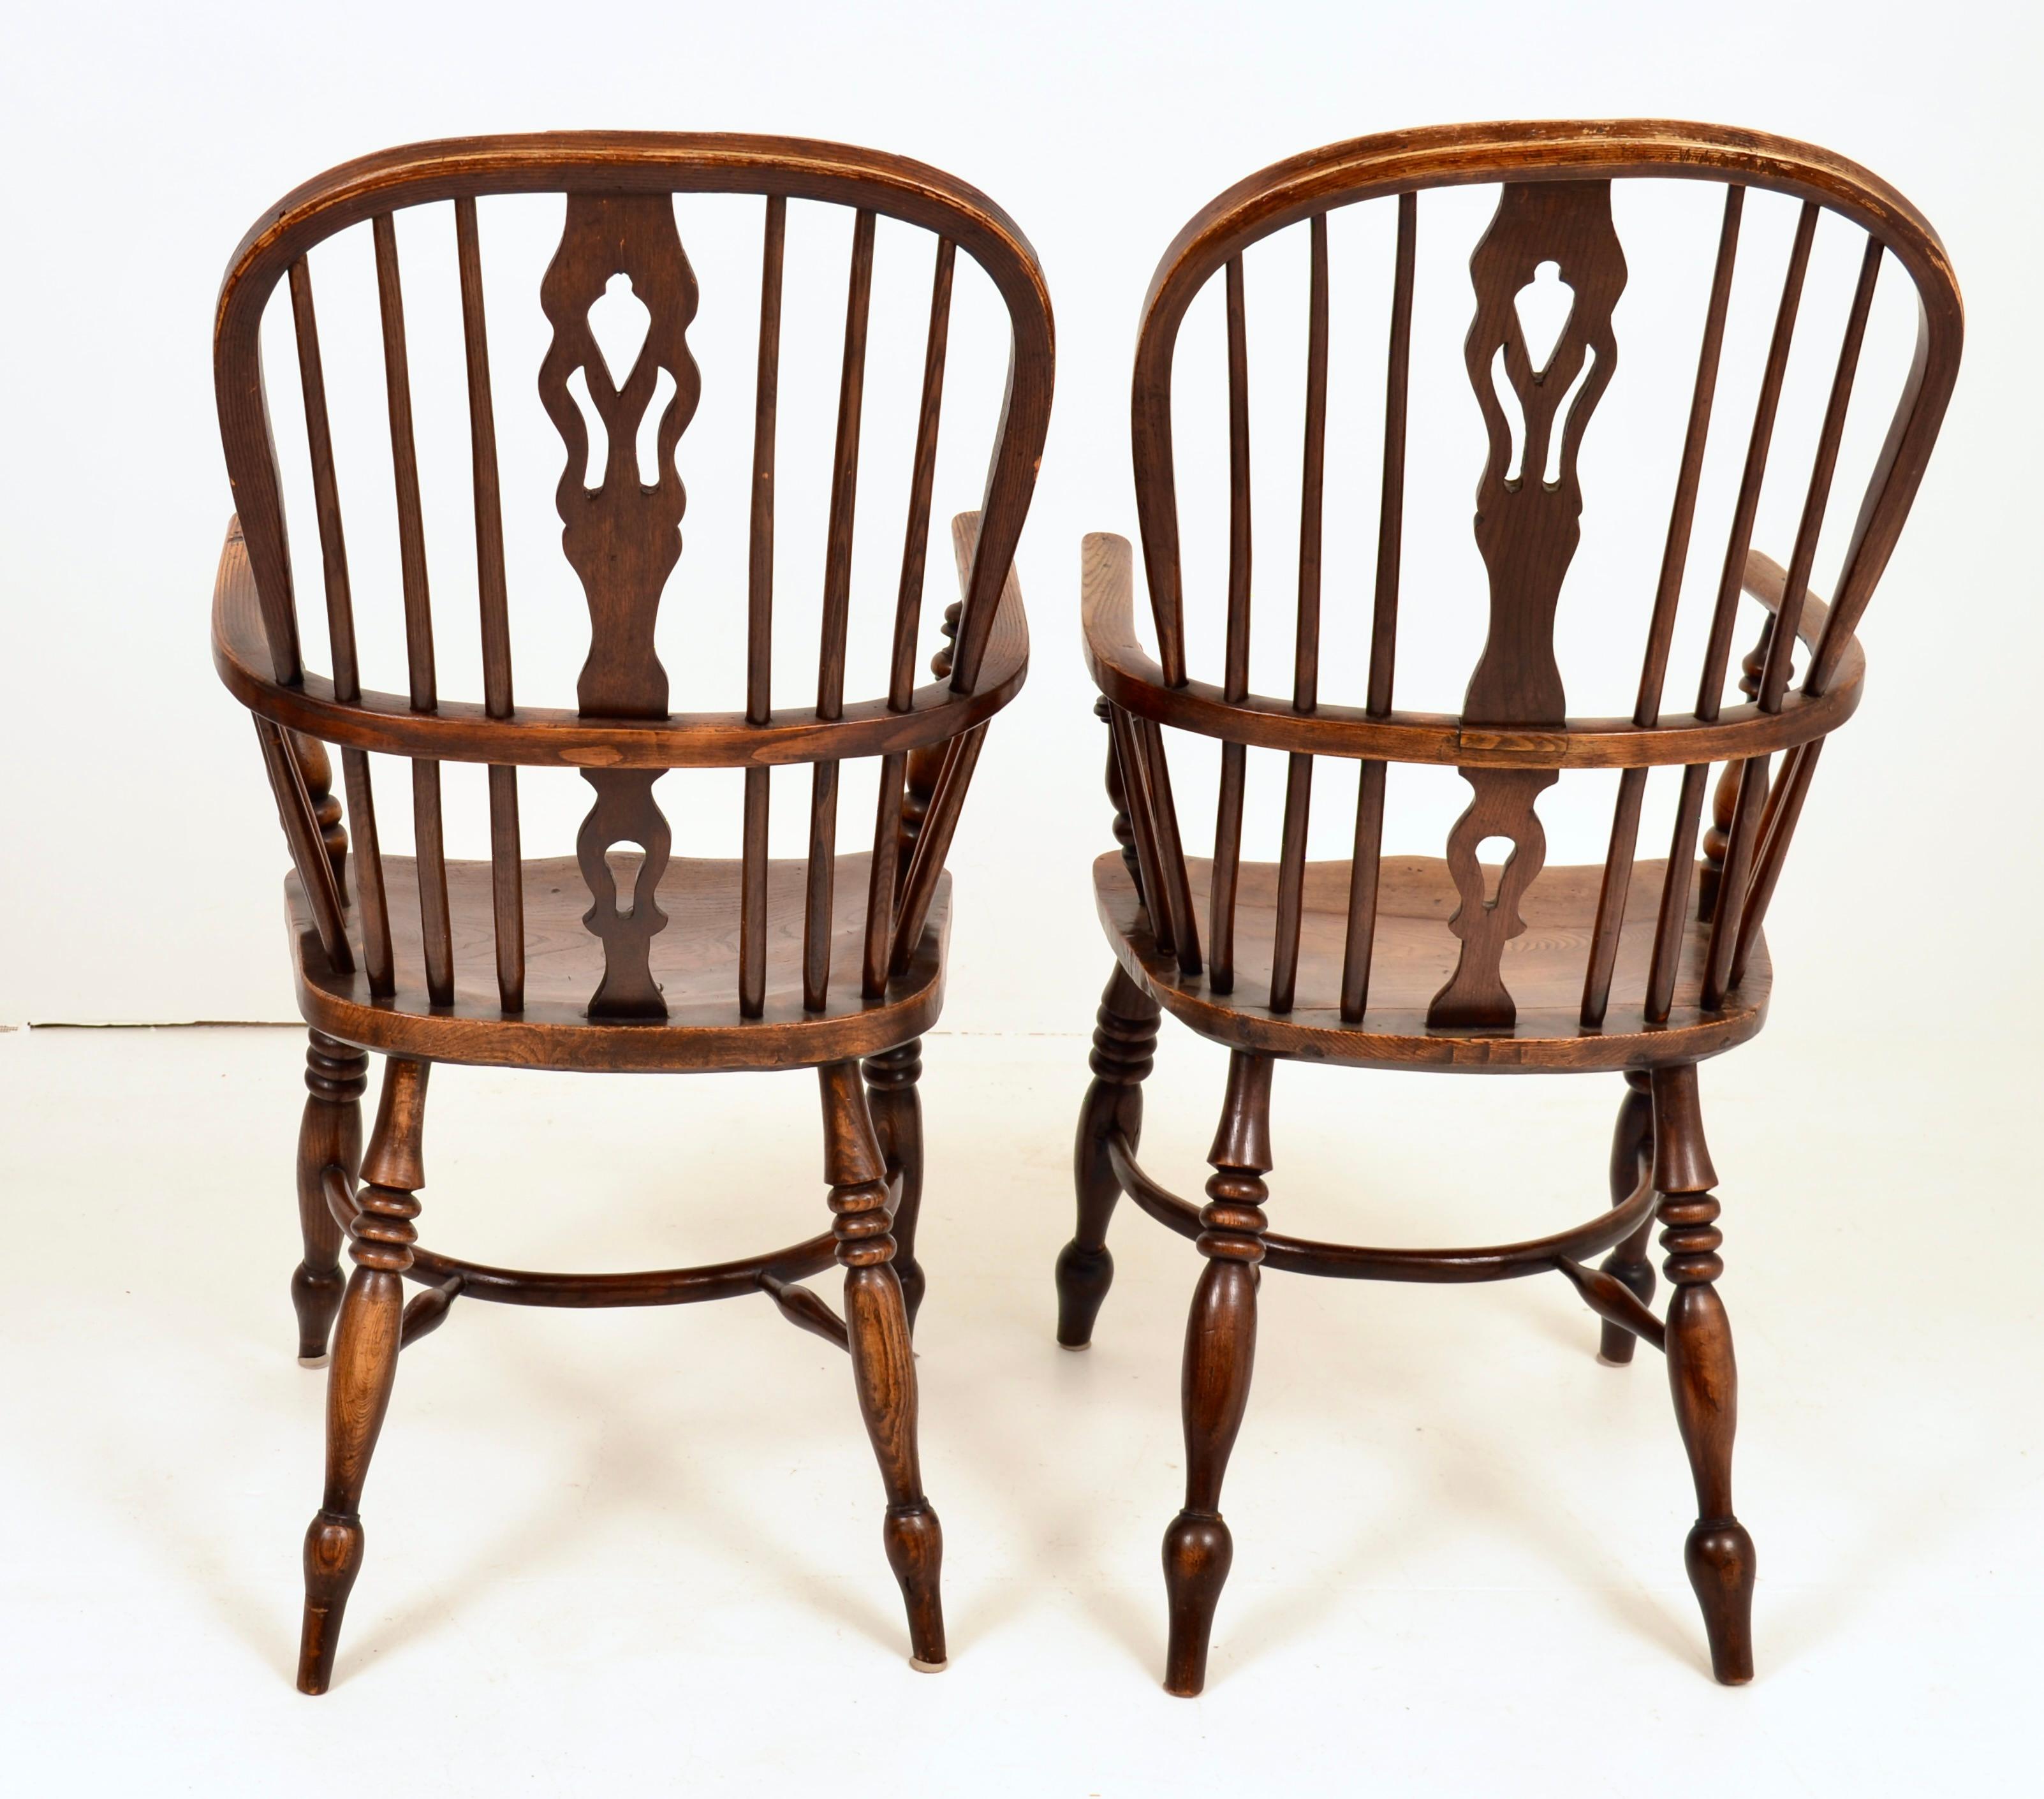 19th C English Oak Windsor Chairs - Set of Six In Good Condition For Sale In Norwalk, CT